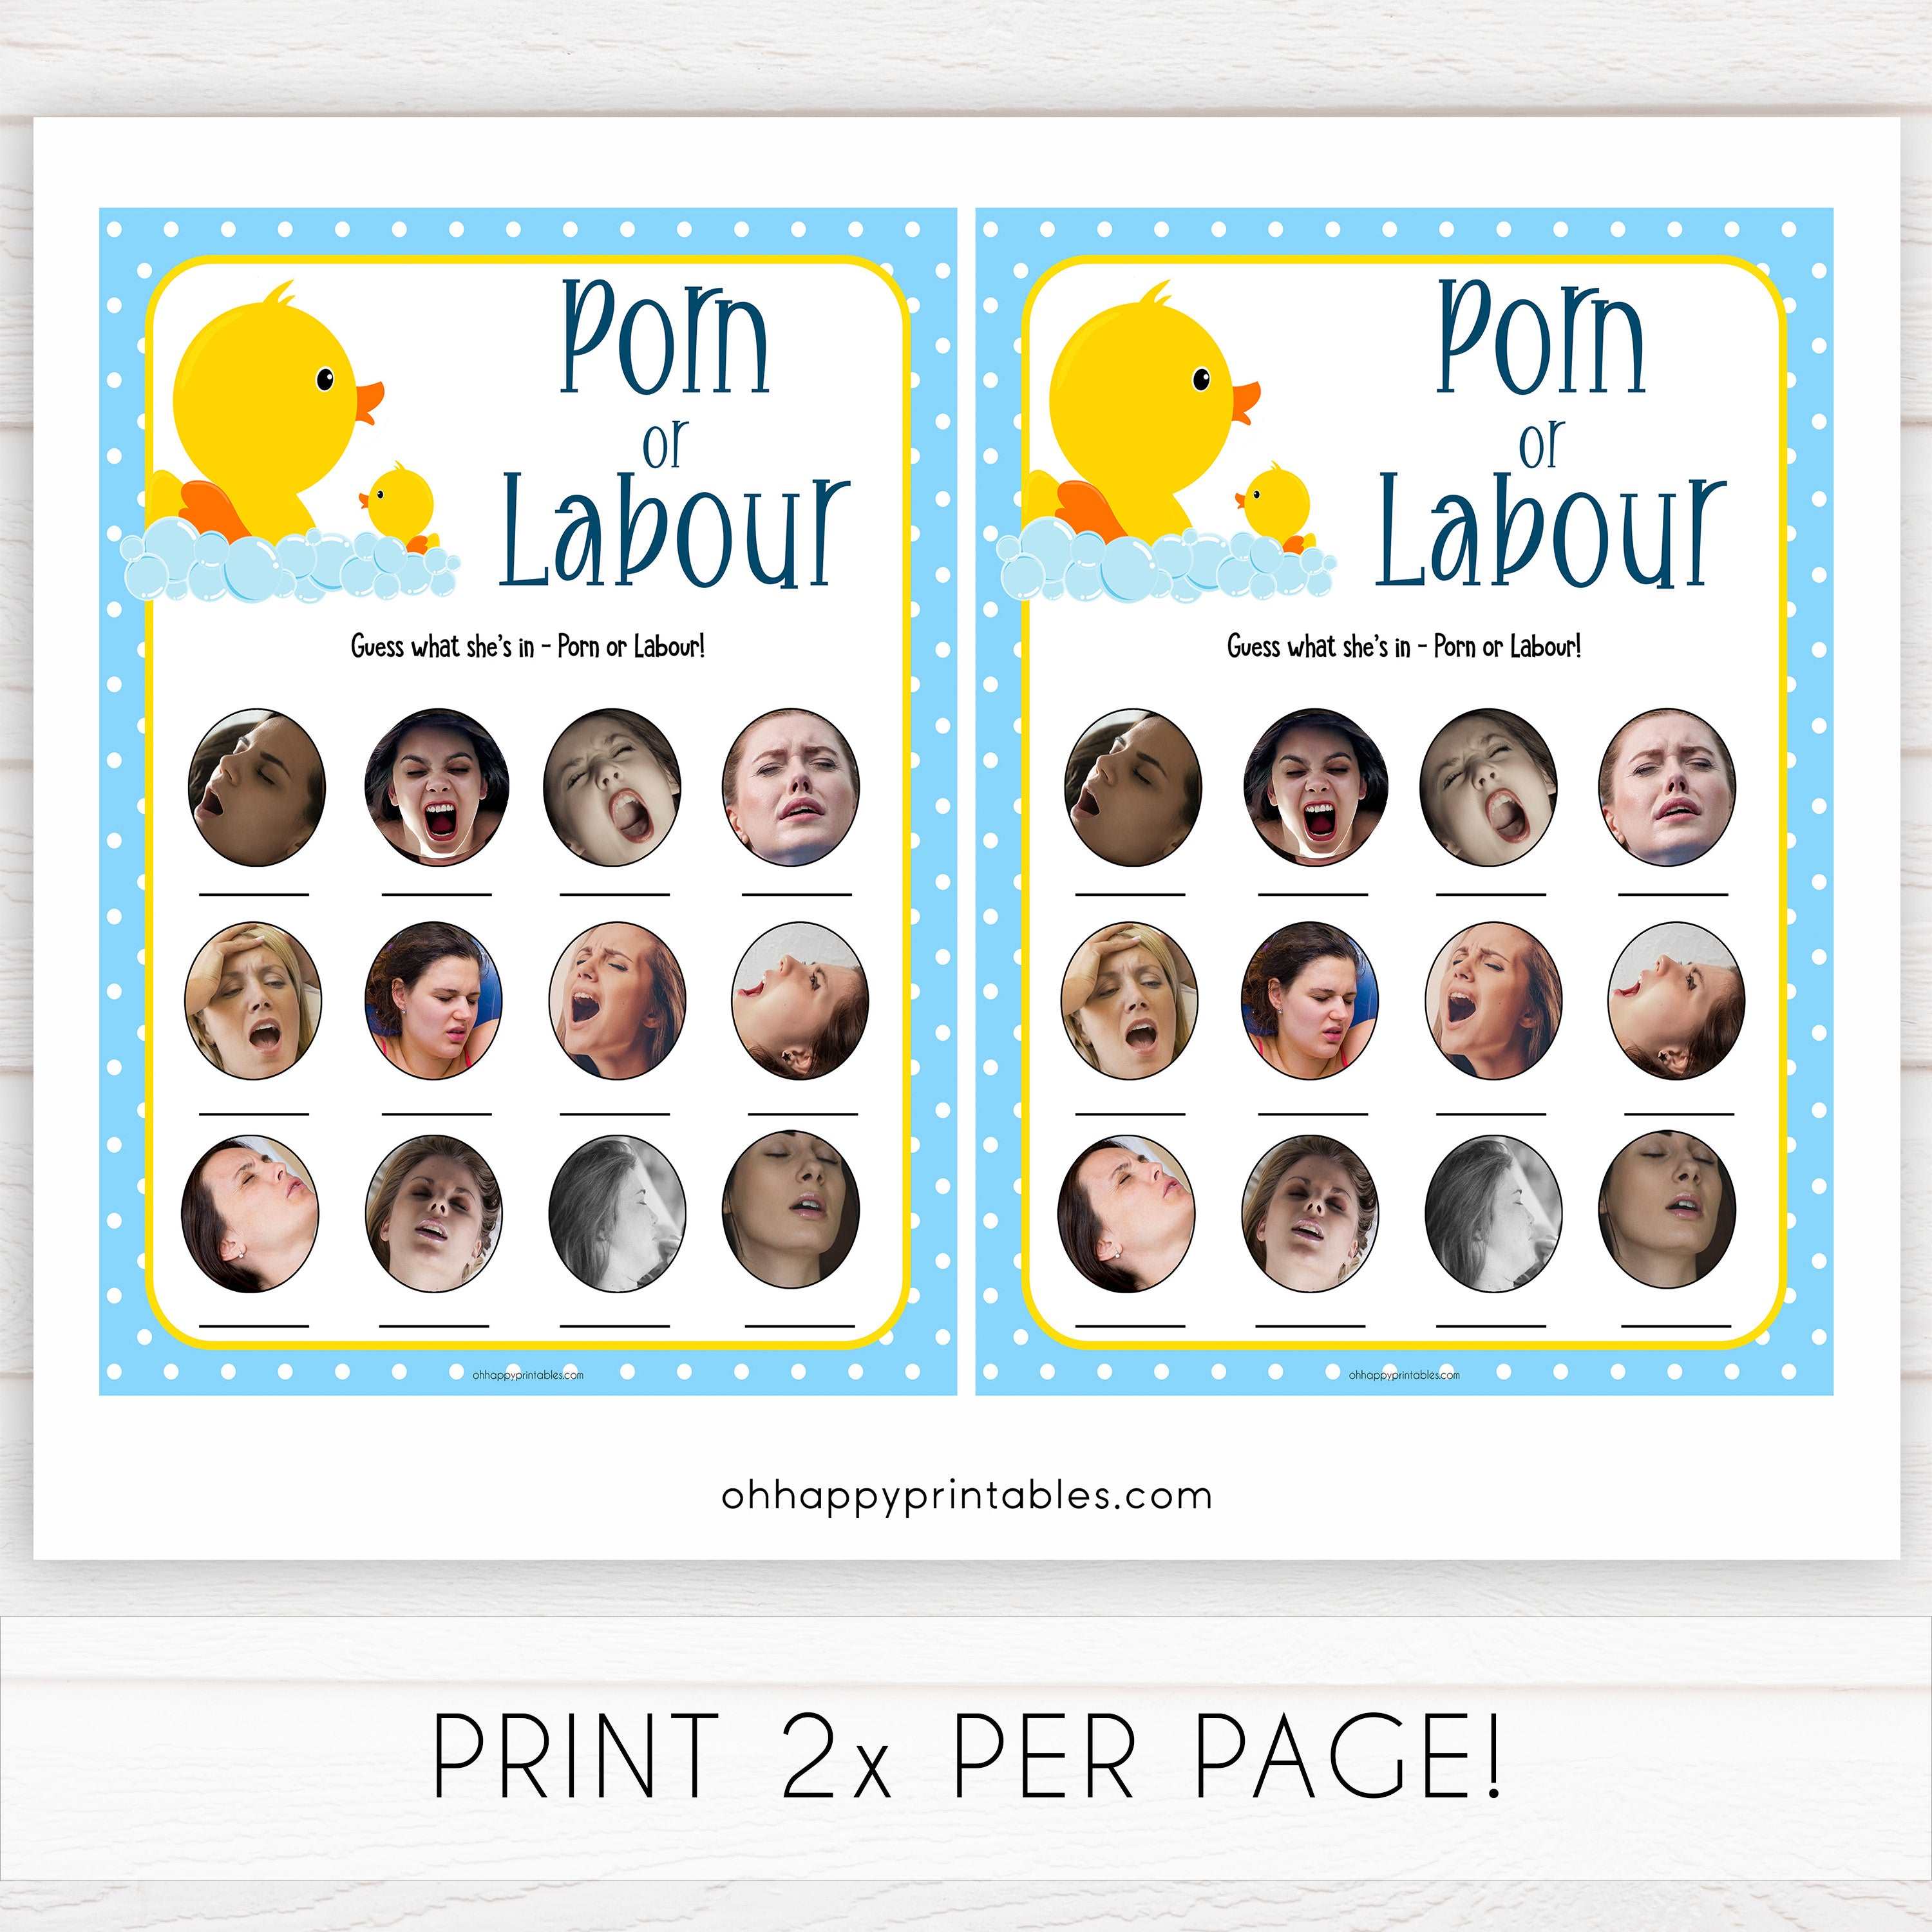 rubber ducky baby games, labor or porn game, baby bump baby game, printable baby shower games, fun baby games, best baby games